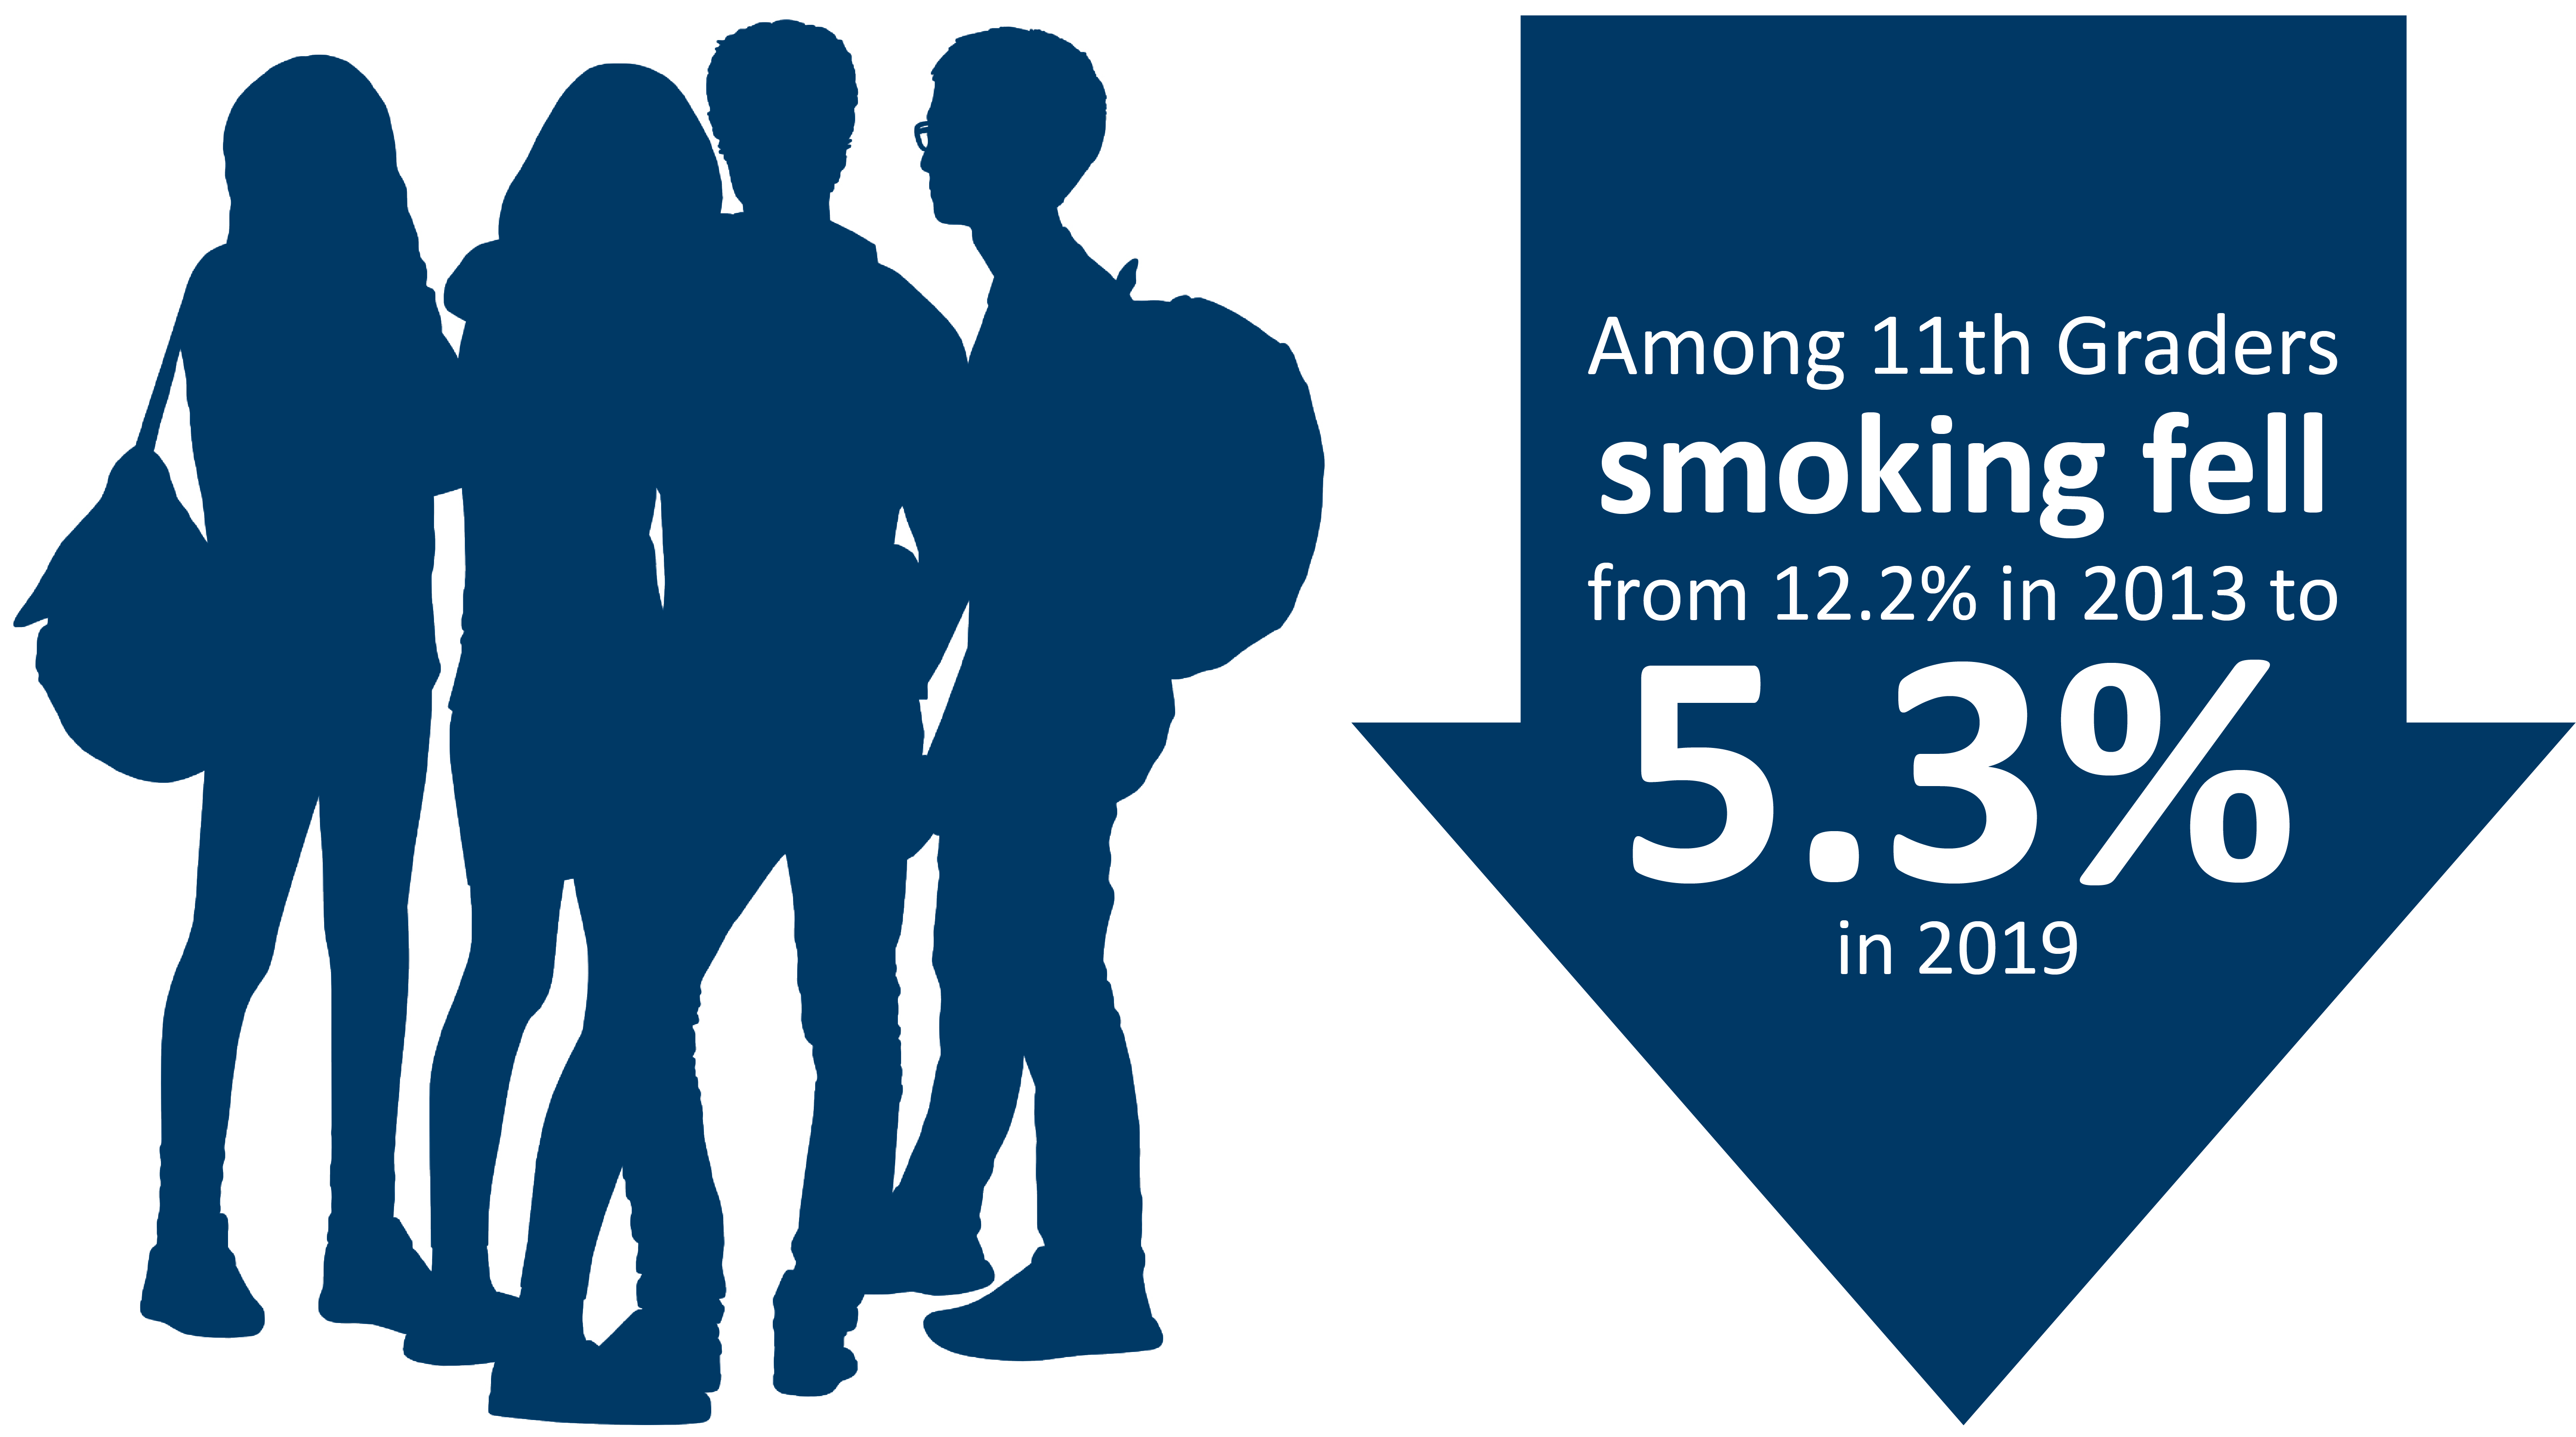 graphic showing smoking among minnesota 11th graders falling from 12.2% in 2013 to 8.4% in 2016